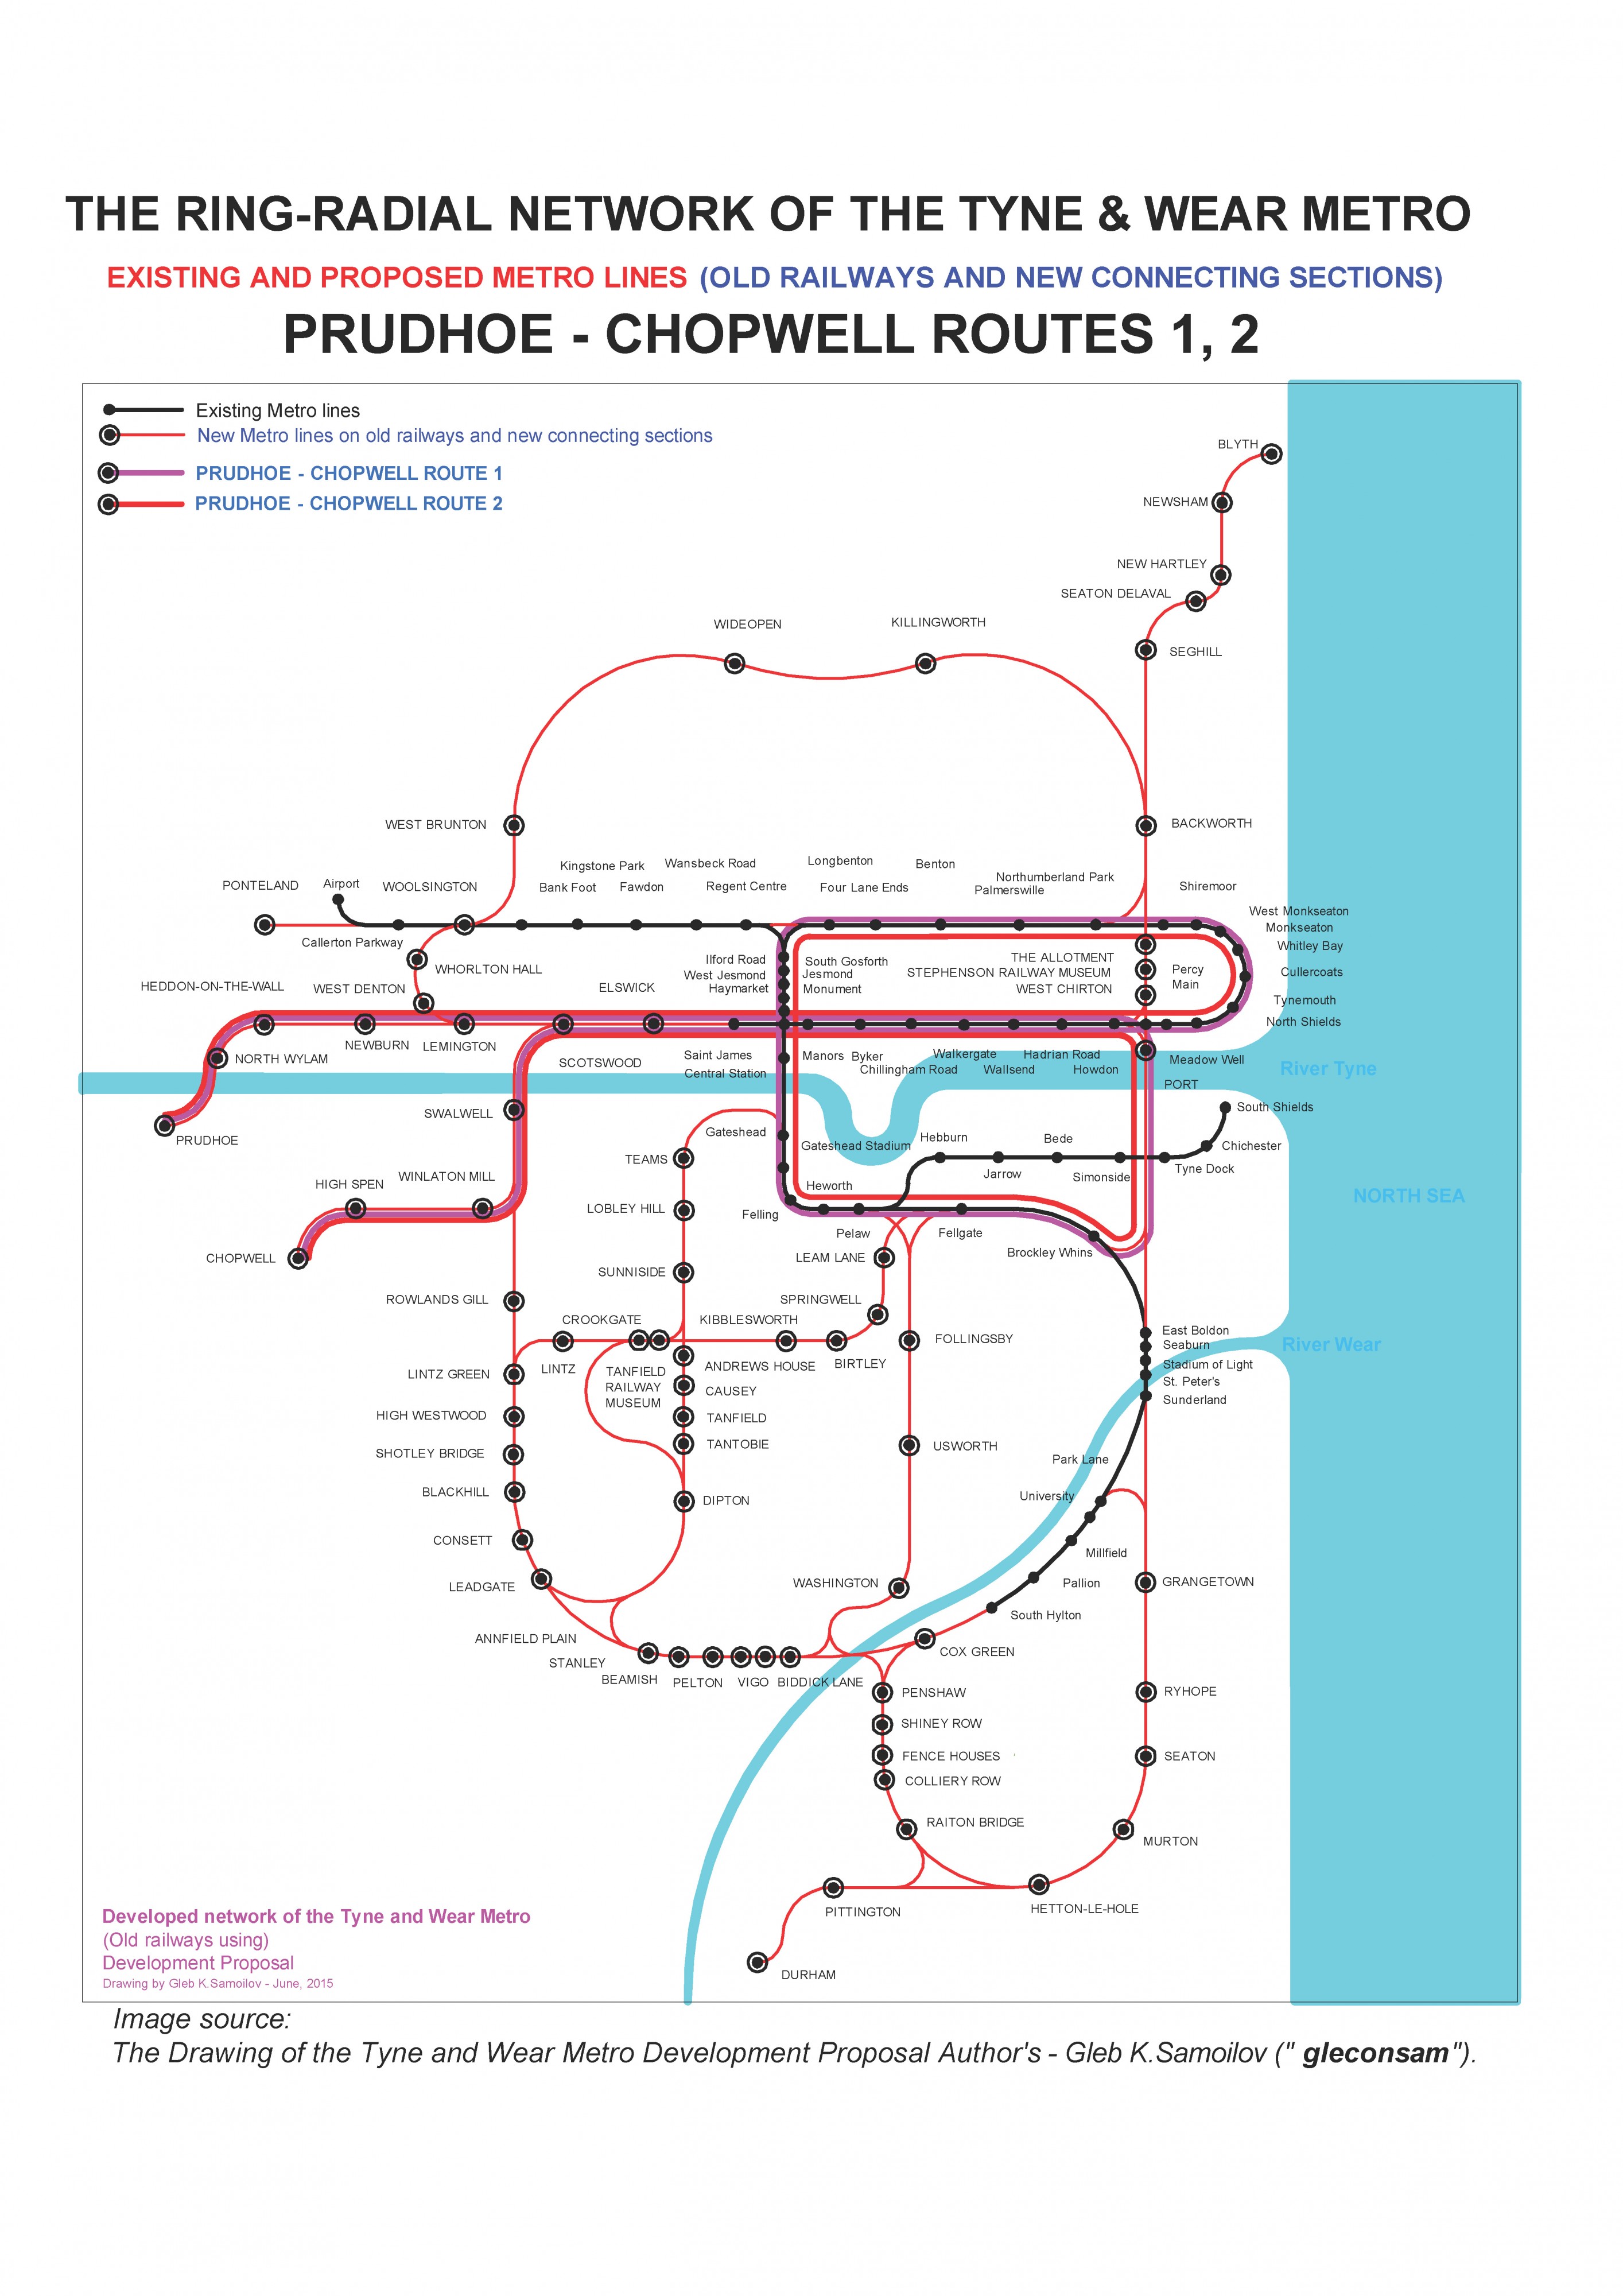 PRUDHOE ~ CHOPWELL routes 1 and 2 of the Tyne and Wear Metro Ring-Radial network